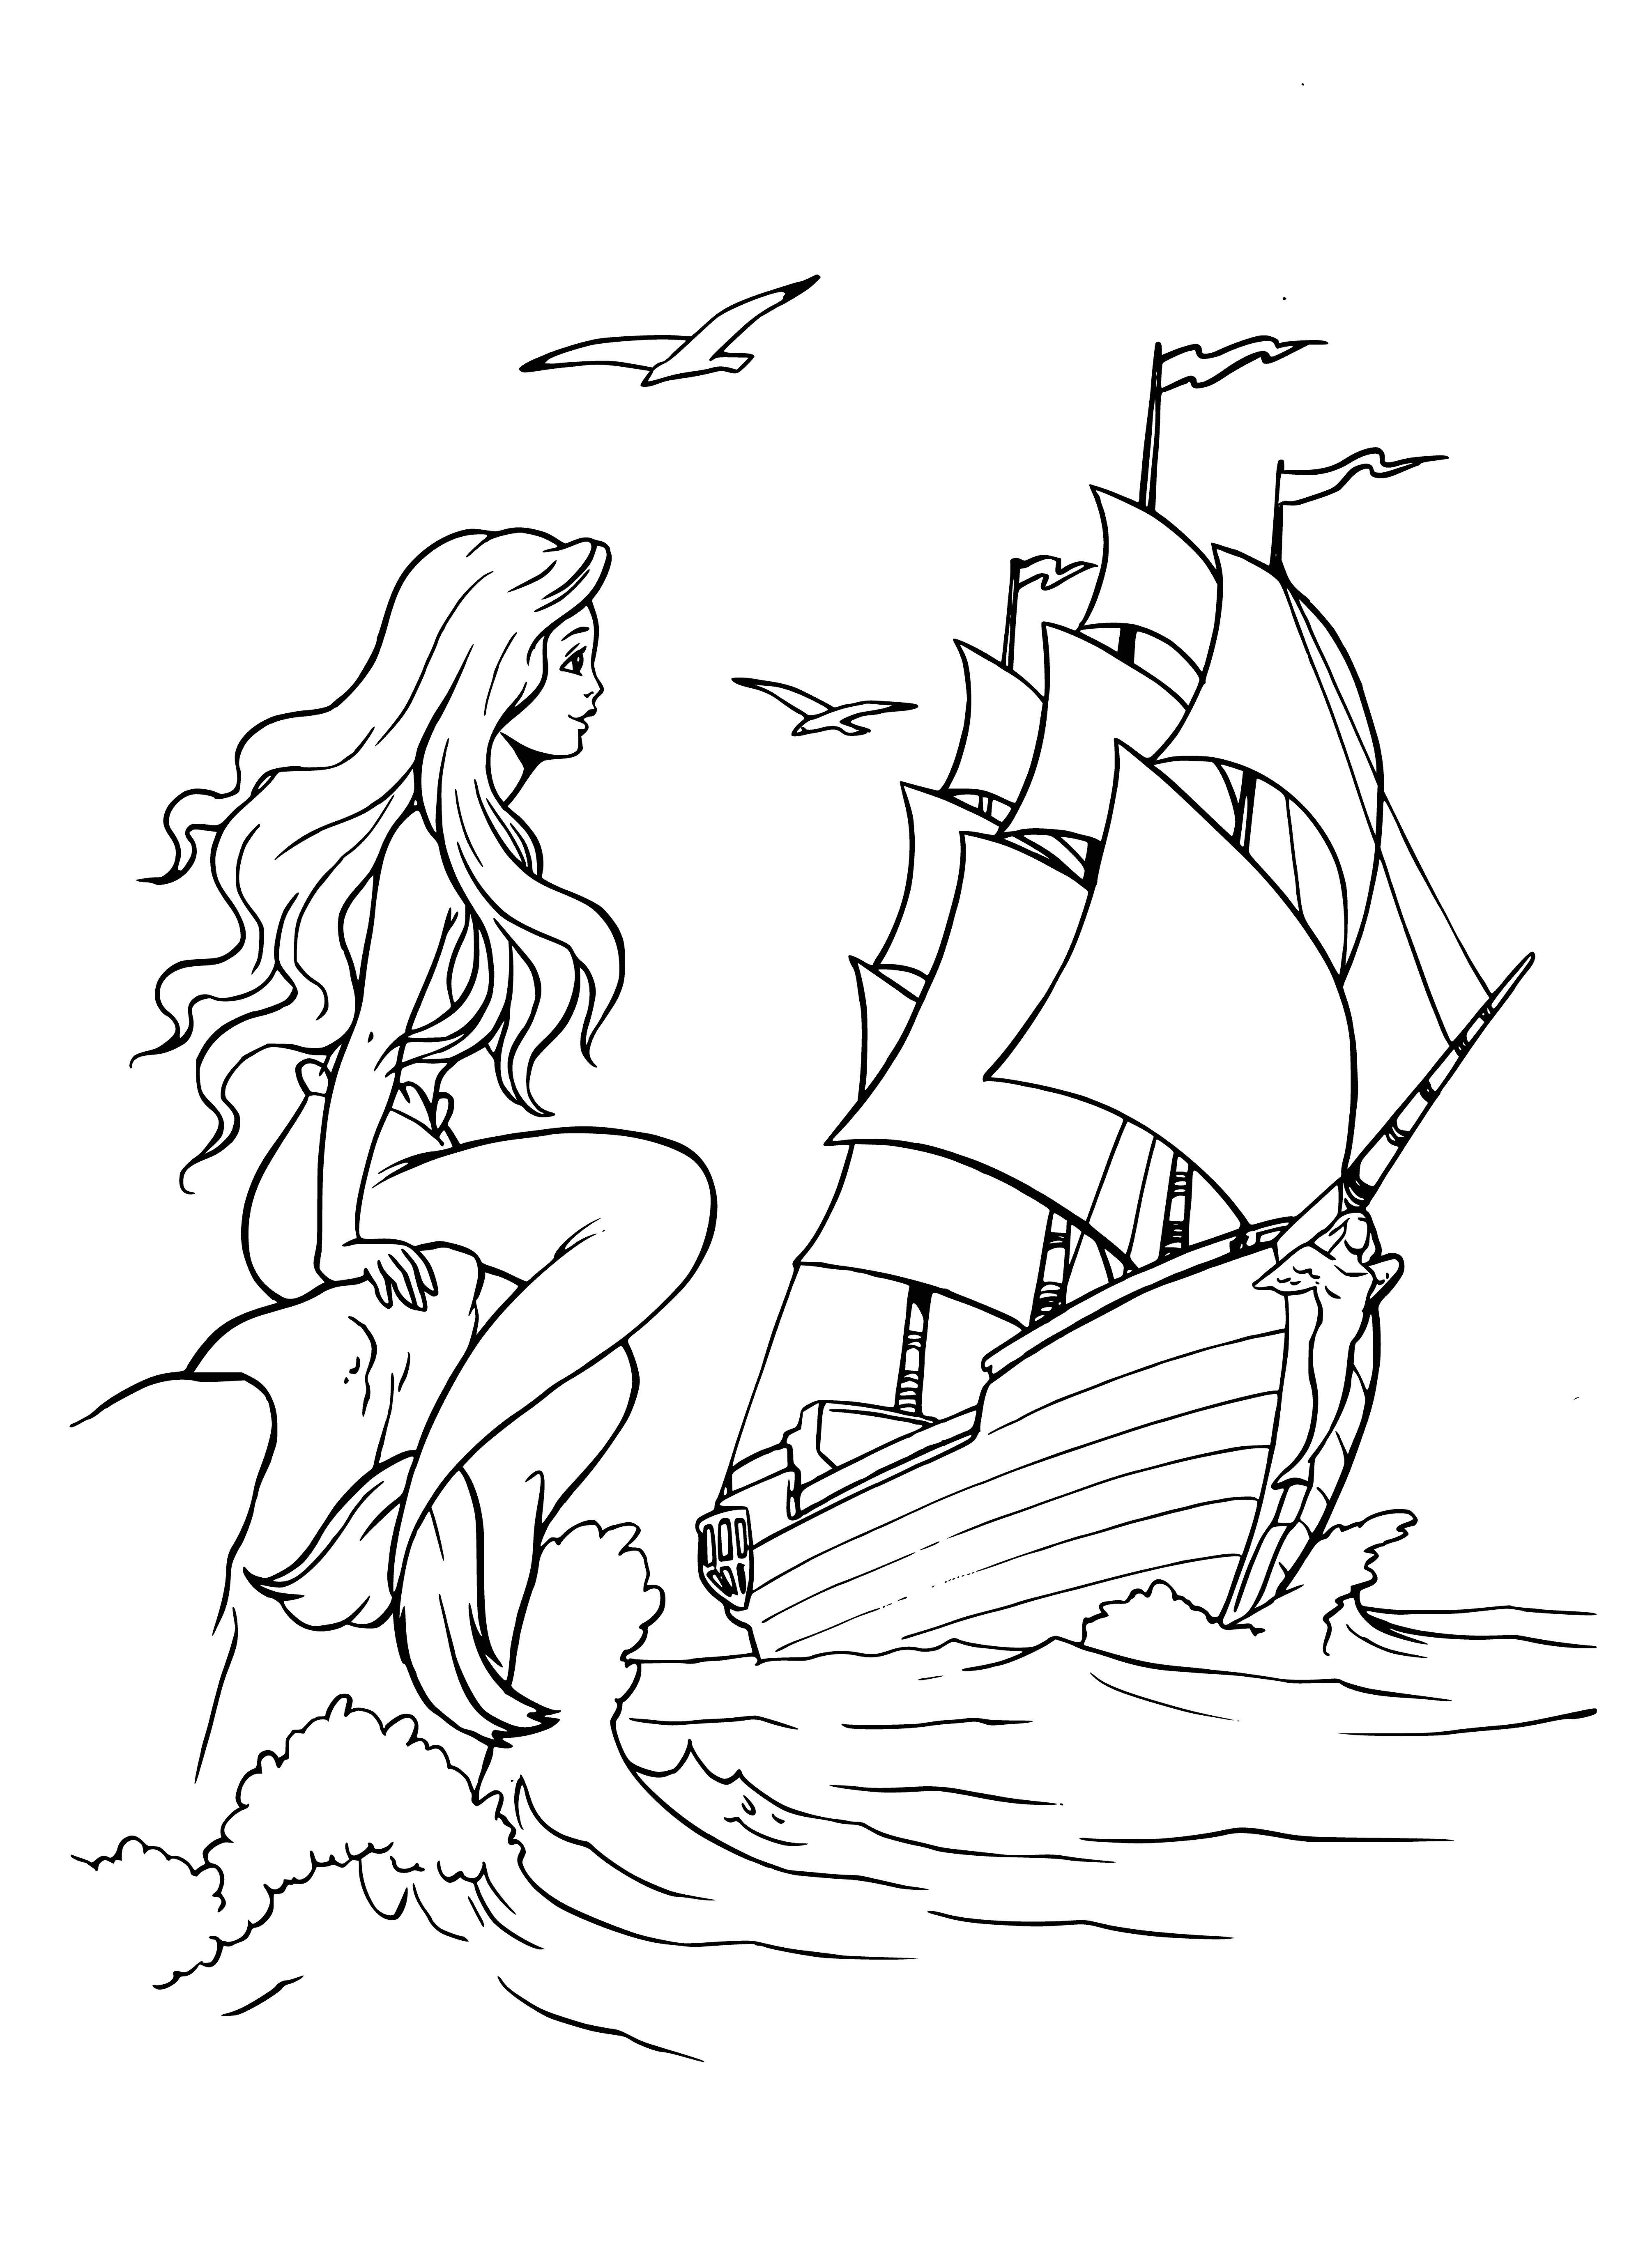 coloring page: The mermaid sits on a rock, watching a big, sail-filled ship, tears in her eyes, sad at heart.